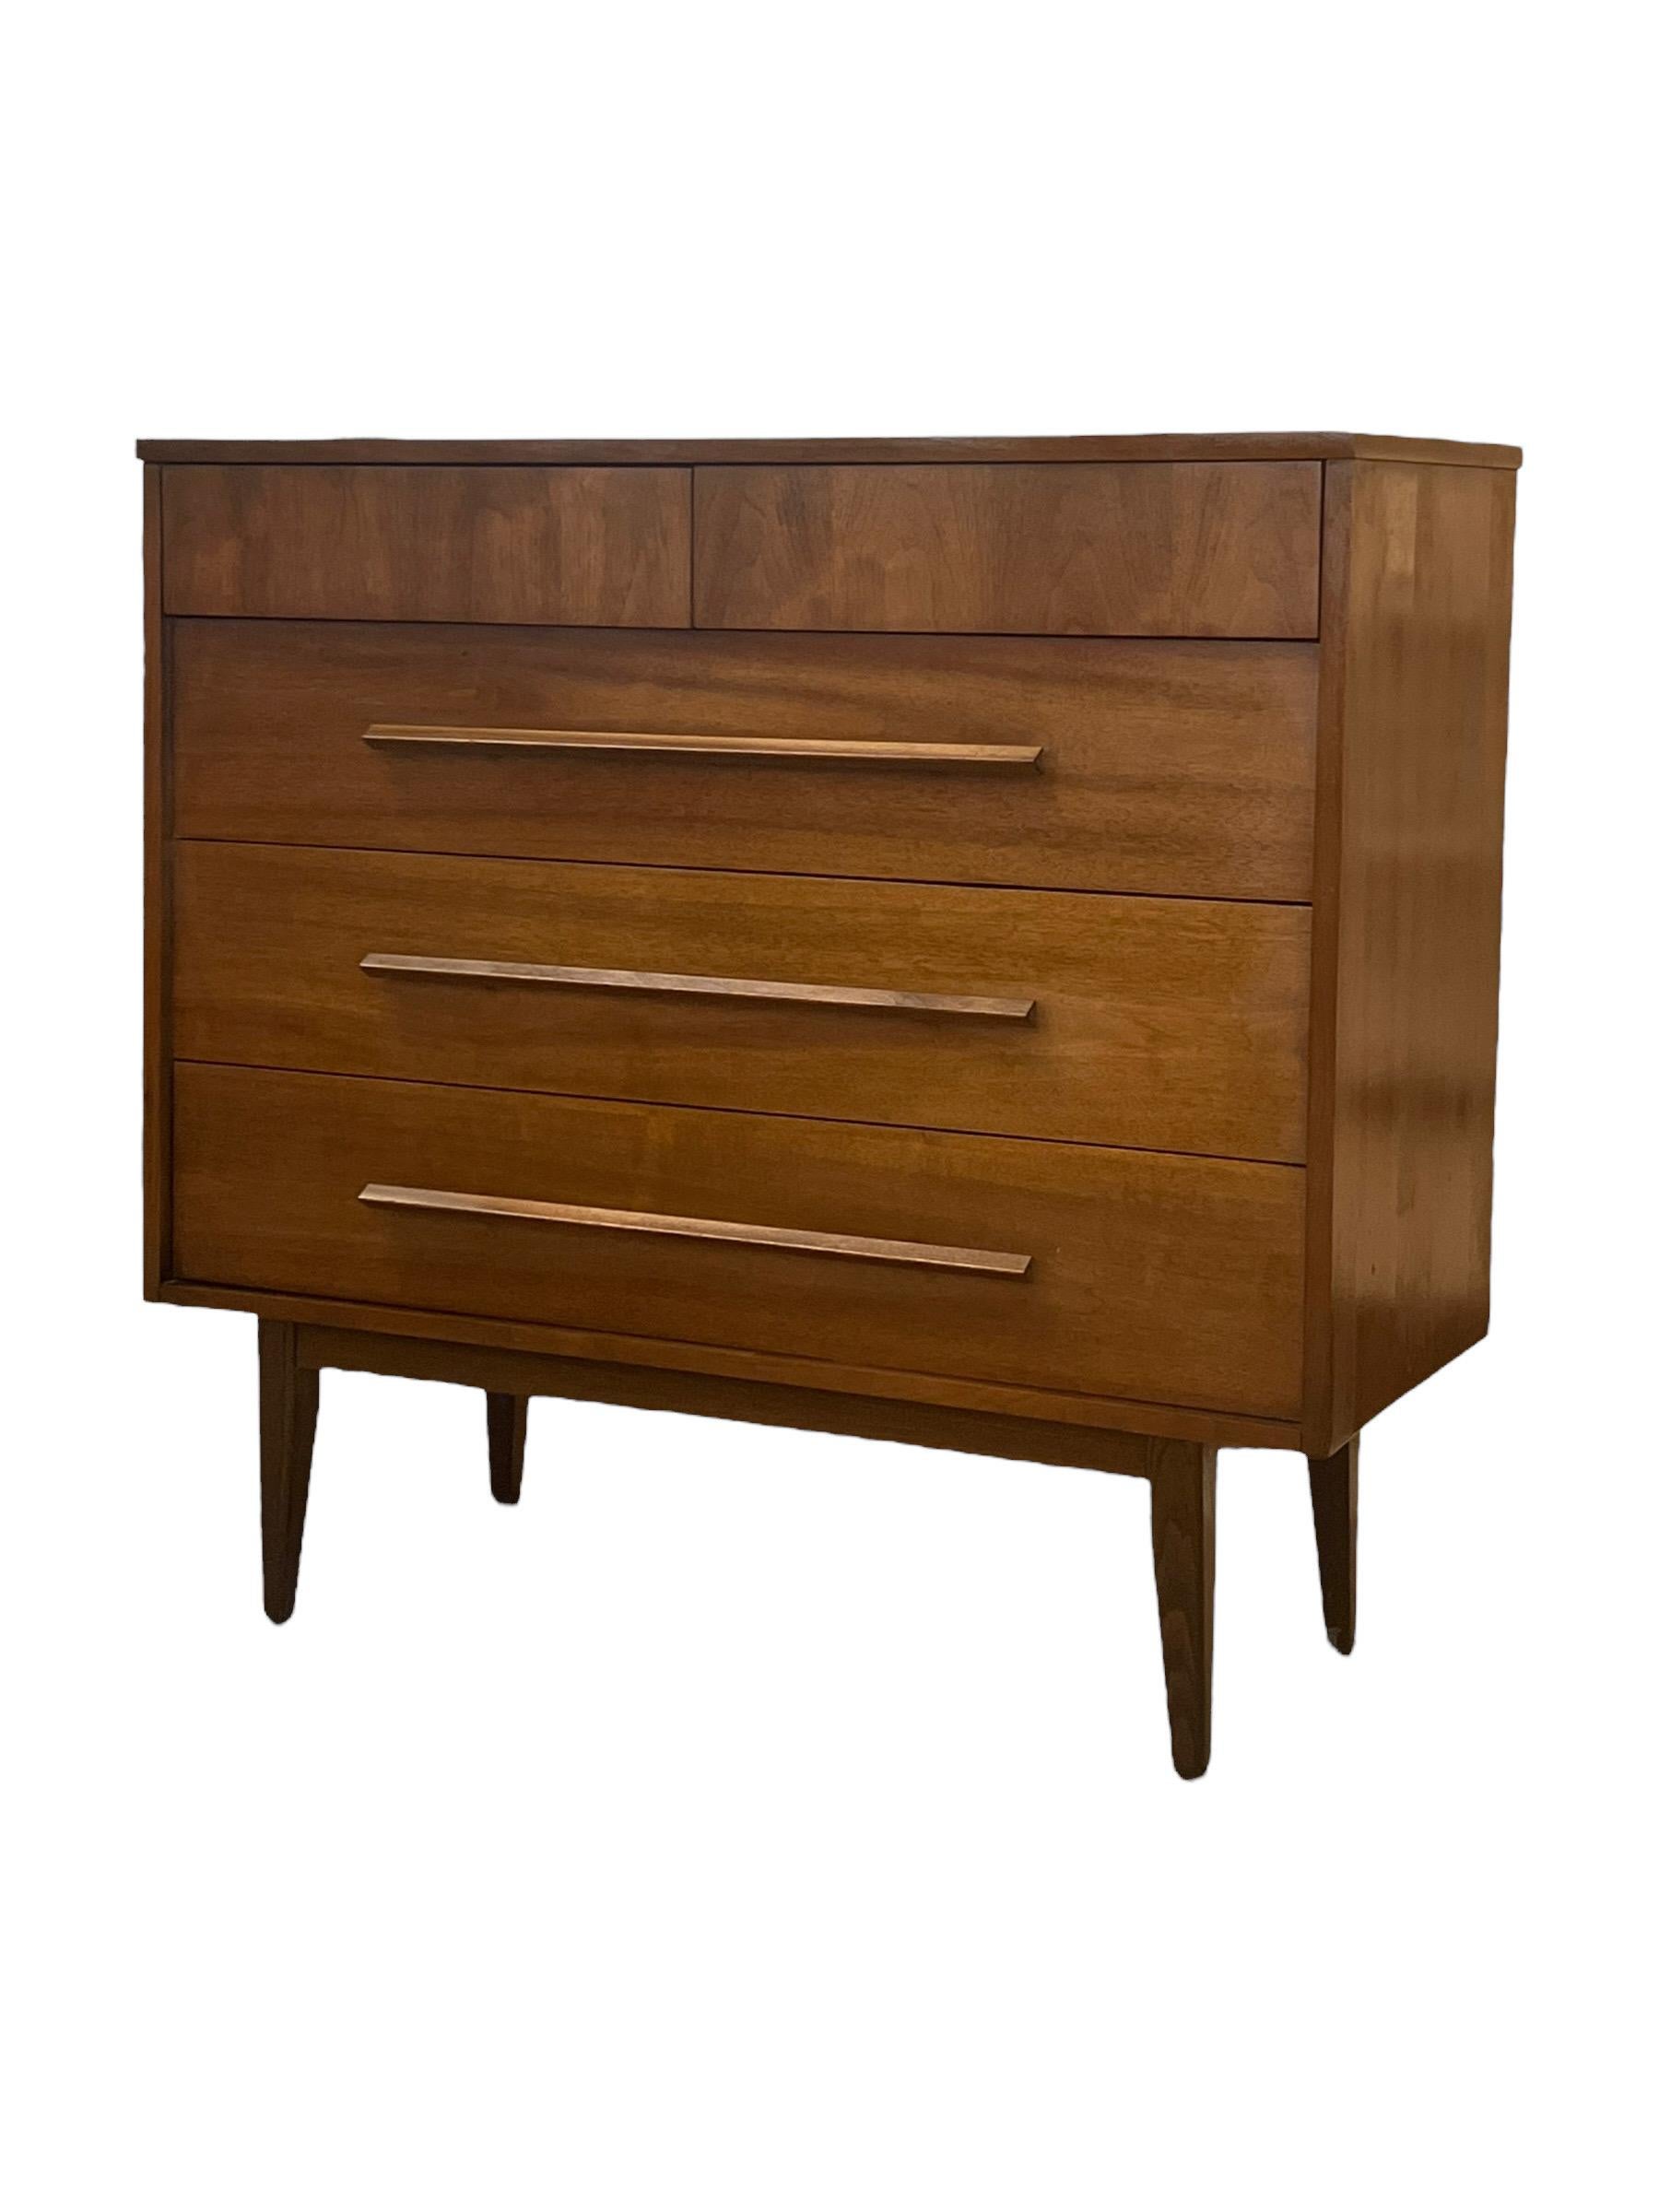 Vintage Mid Century Modern Cherry Wood Tallboy Dresser and End Table Set In Good Condition For Sale In Seattle, WA